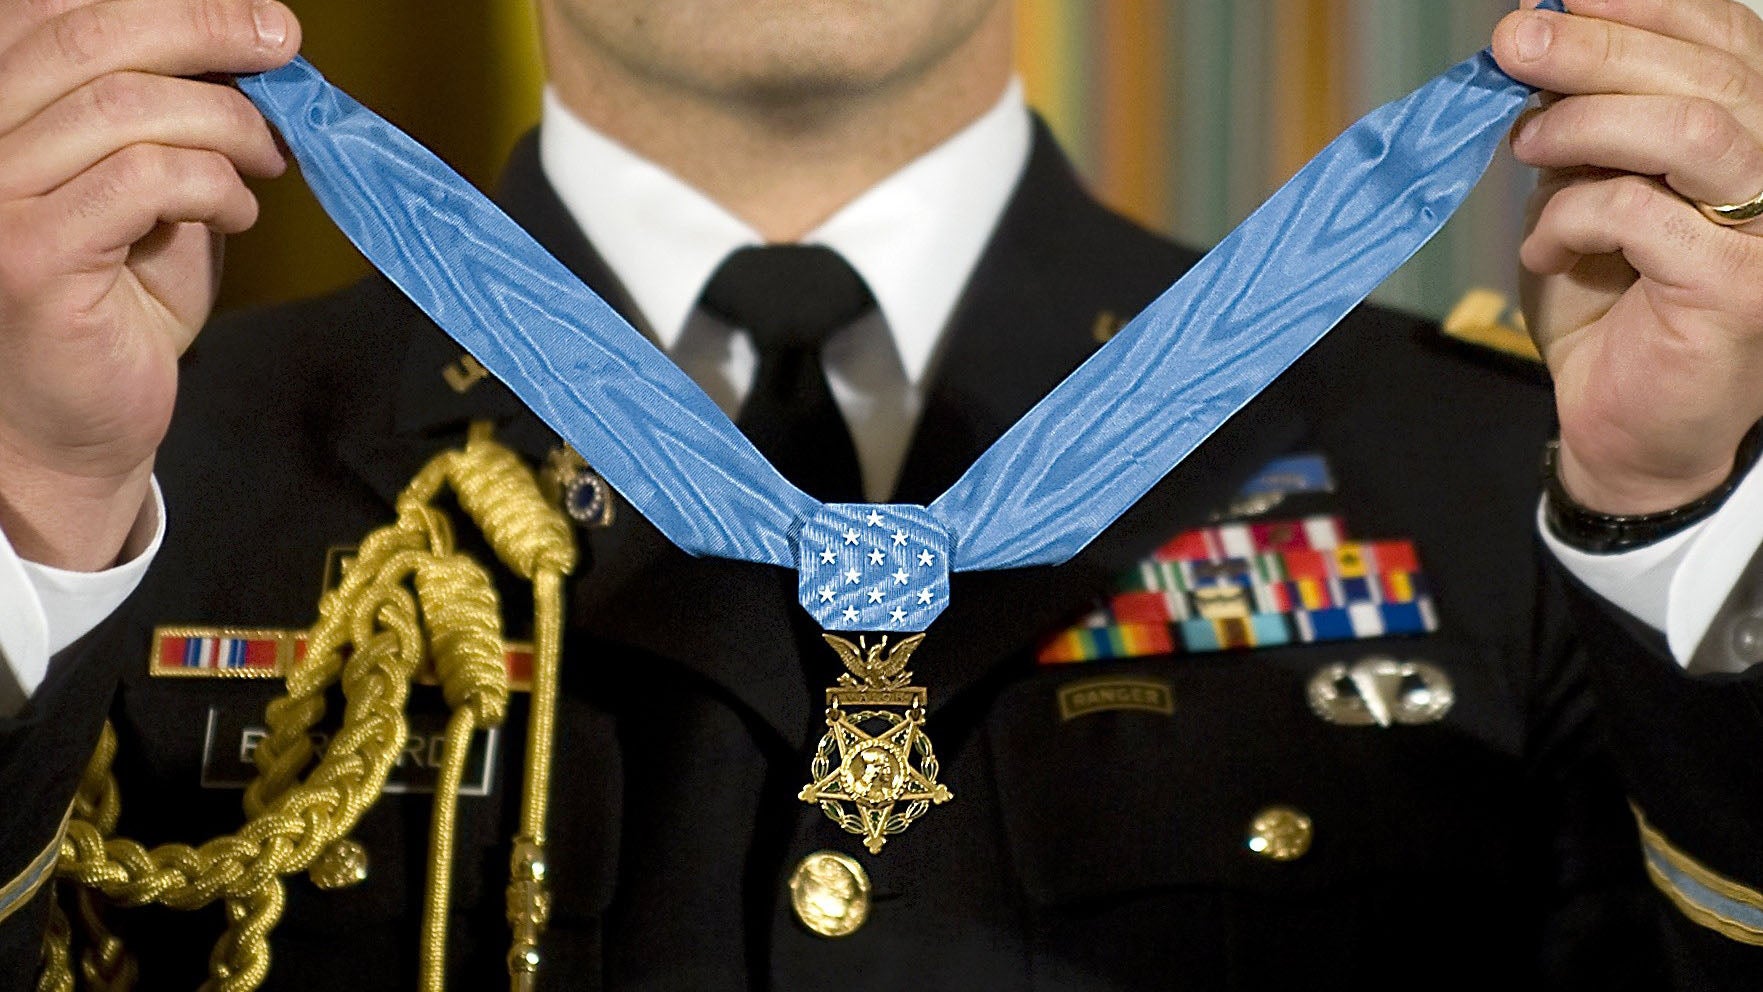 An Army Medal of Honor.